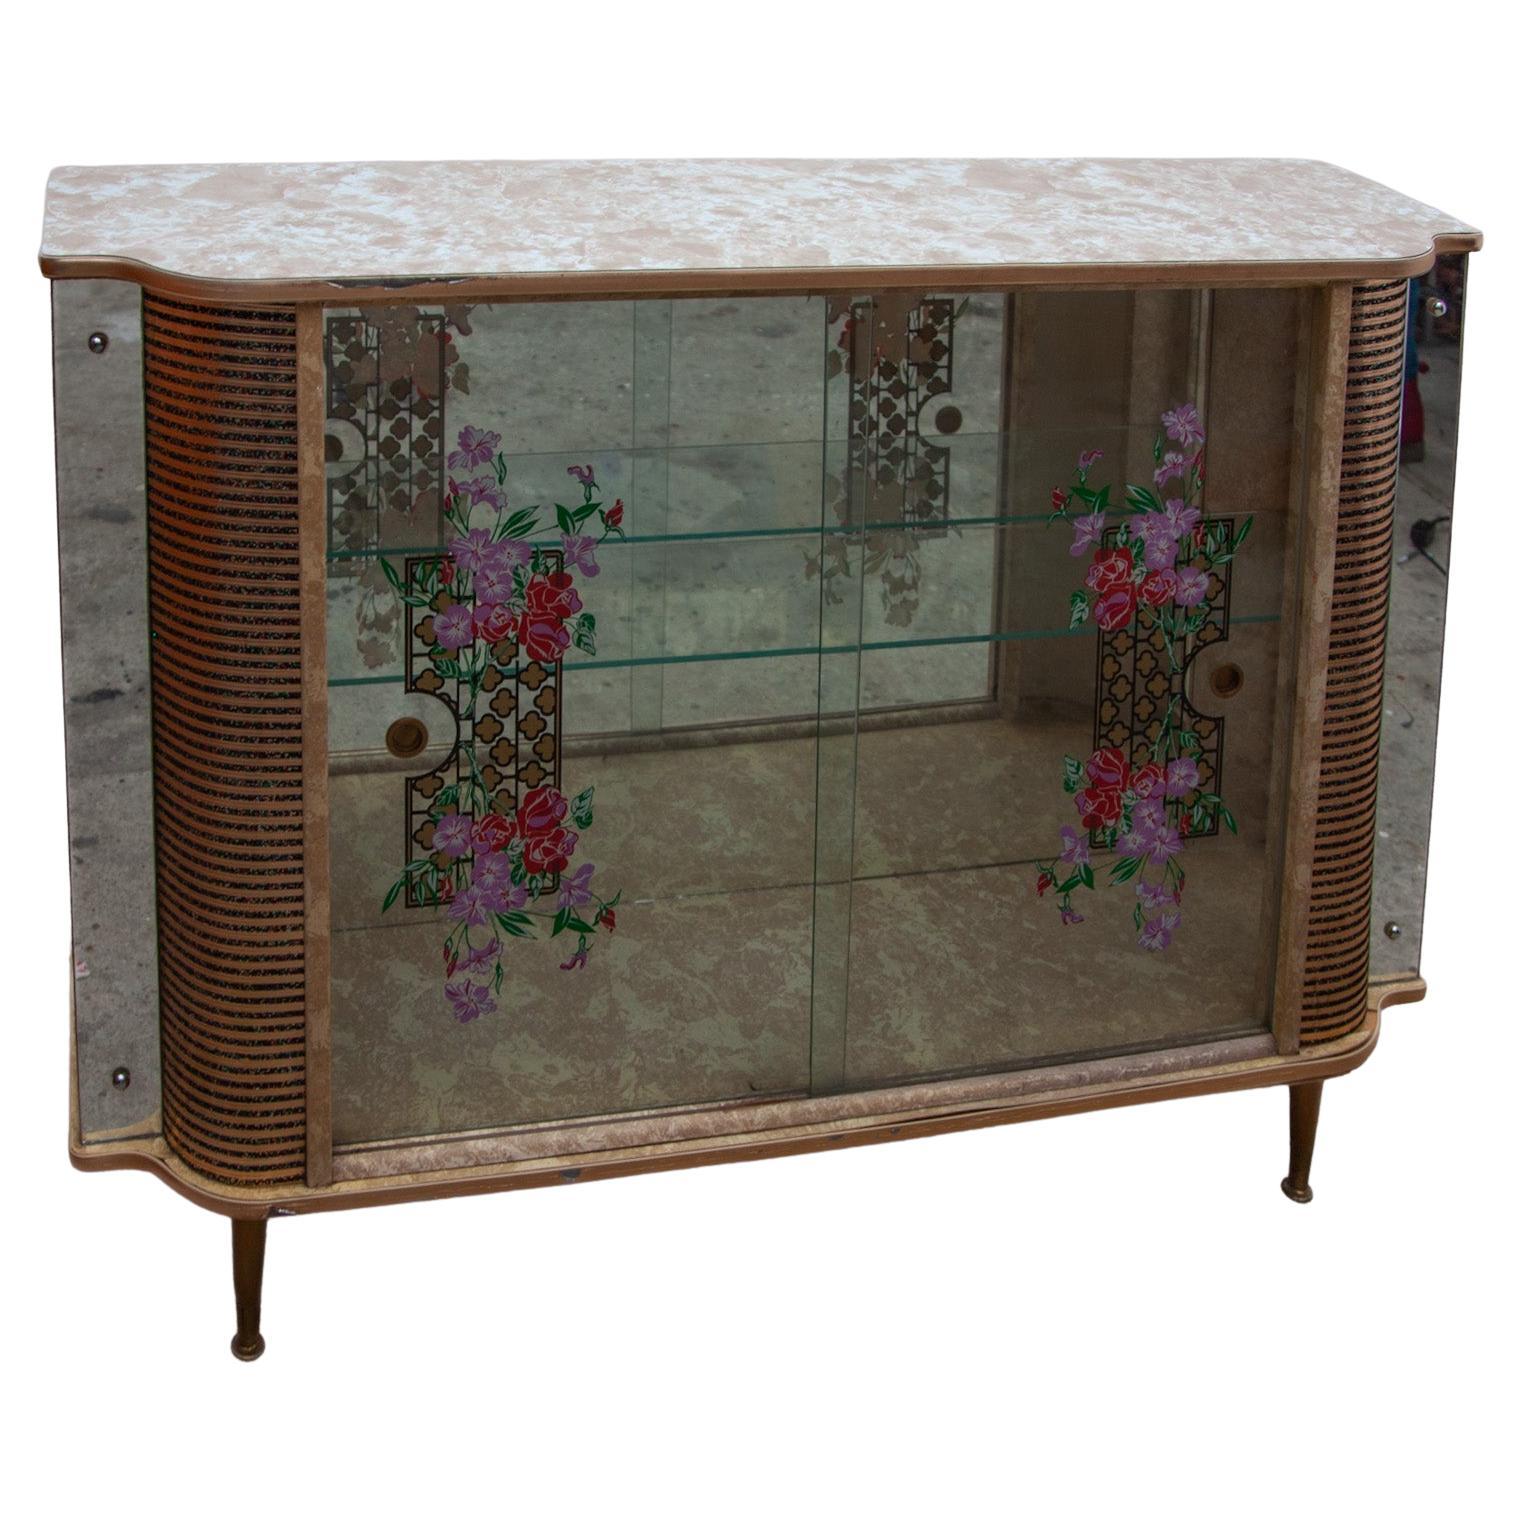 A vintage glass cocktail display cabinet with glass doors and shelves. Decorative illustrated glass in a teak frame with two glass shelves and mirrored accents. Brass trim throughout. In good original condition this piece of furniture has certainly